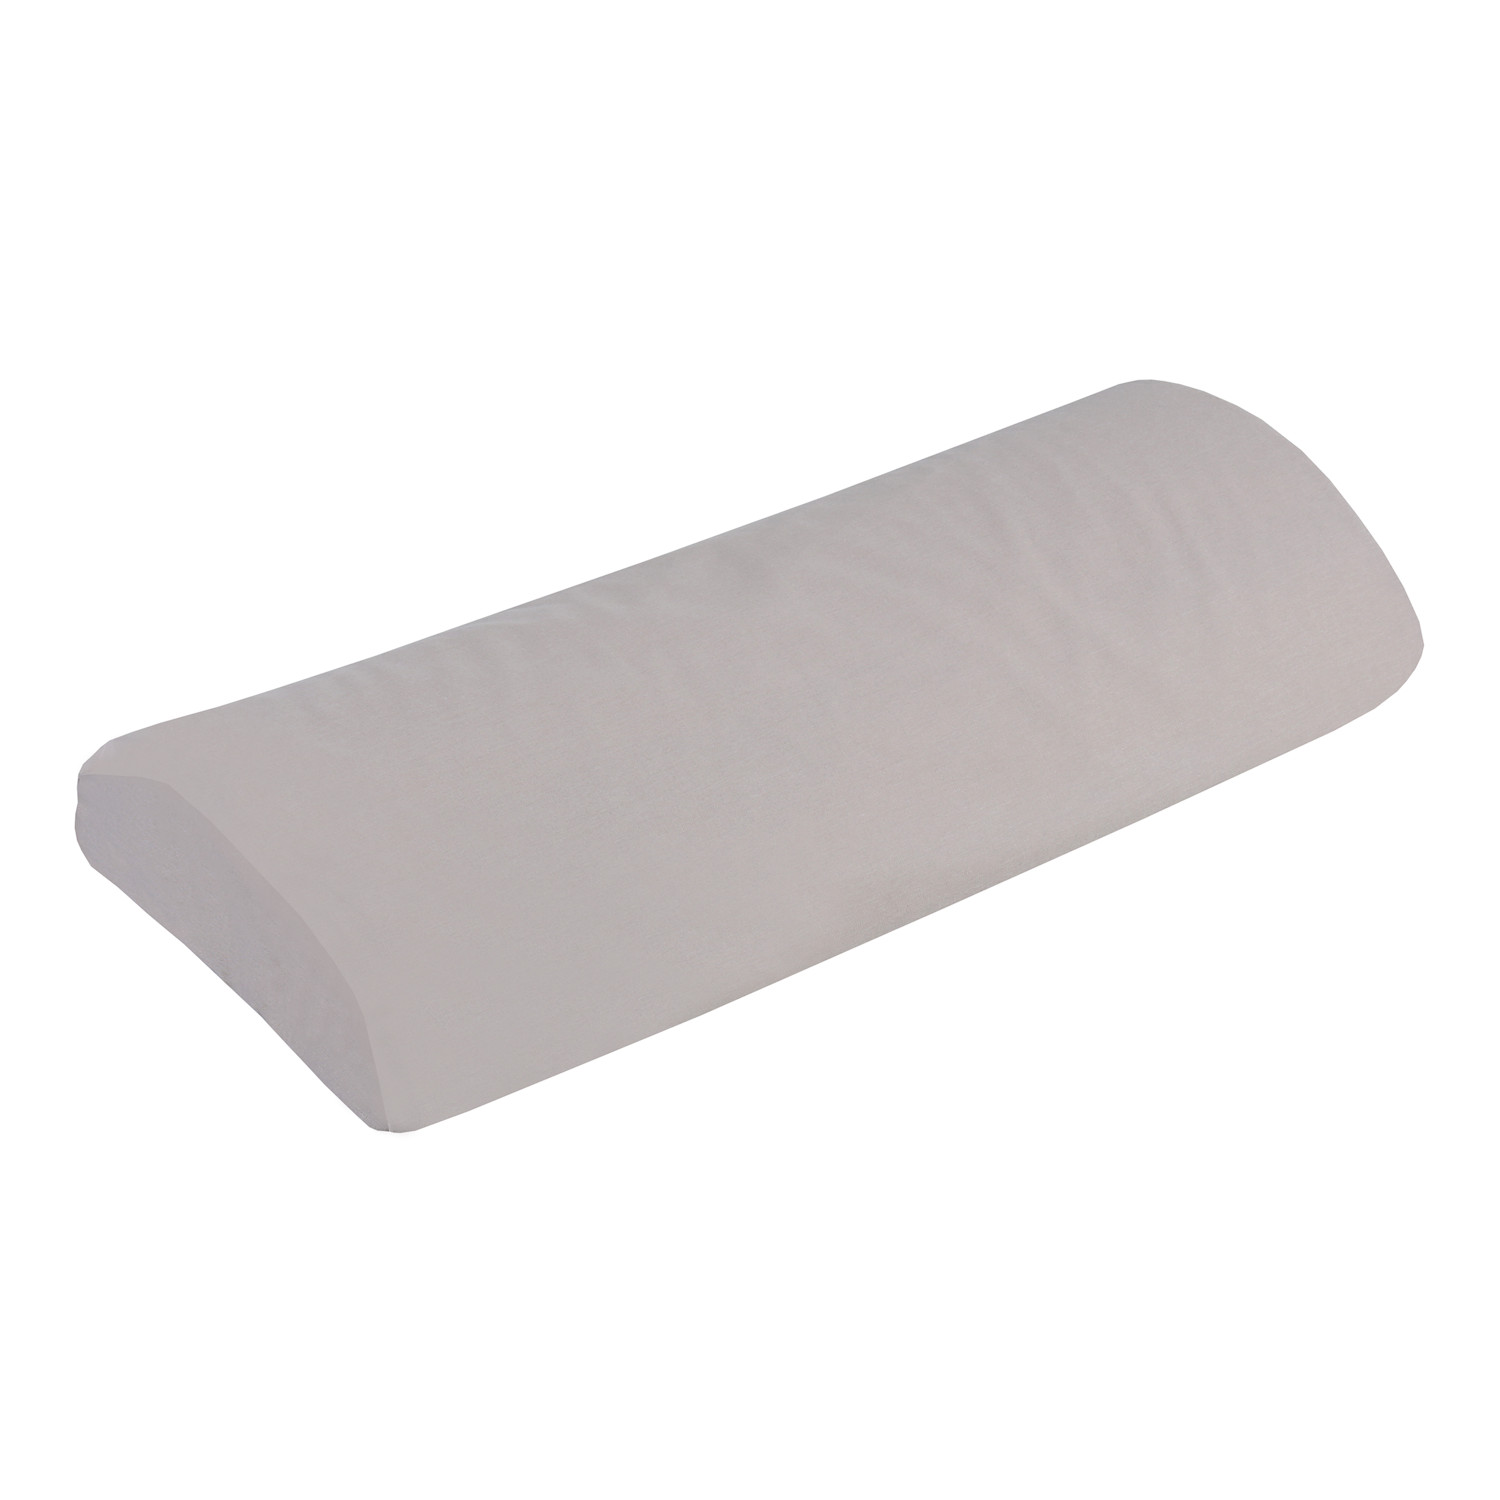 Hermell Products HERMELL PRODUCTS Half Moon Bolster Pillow Firm Under Knee  Pillow - Khaki